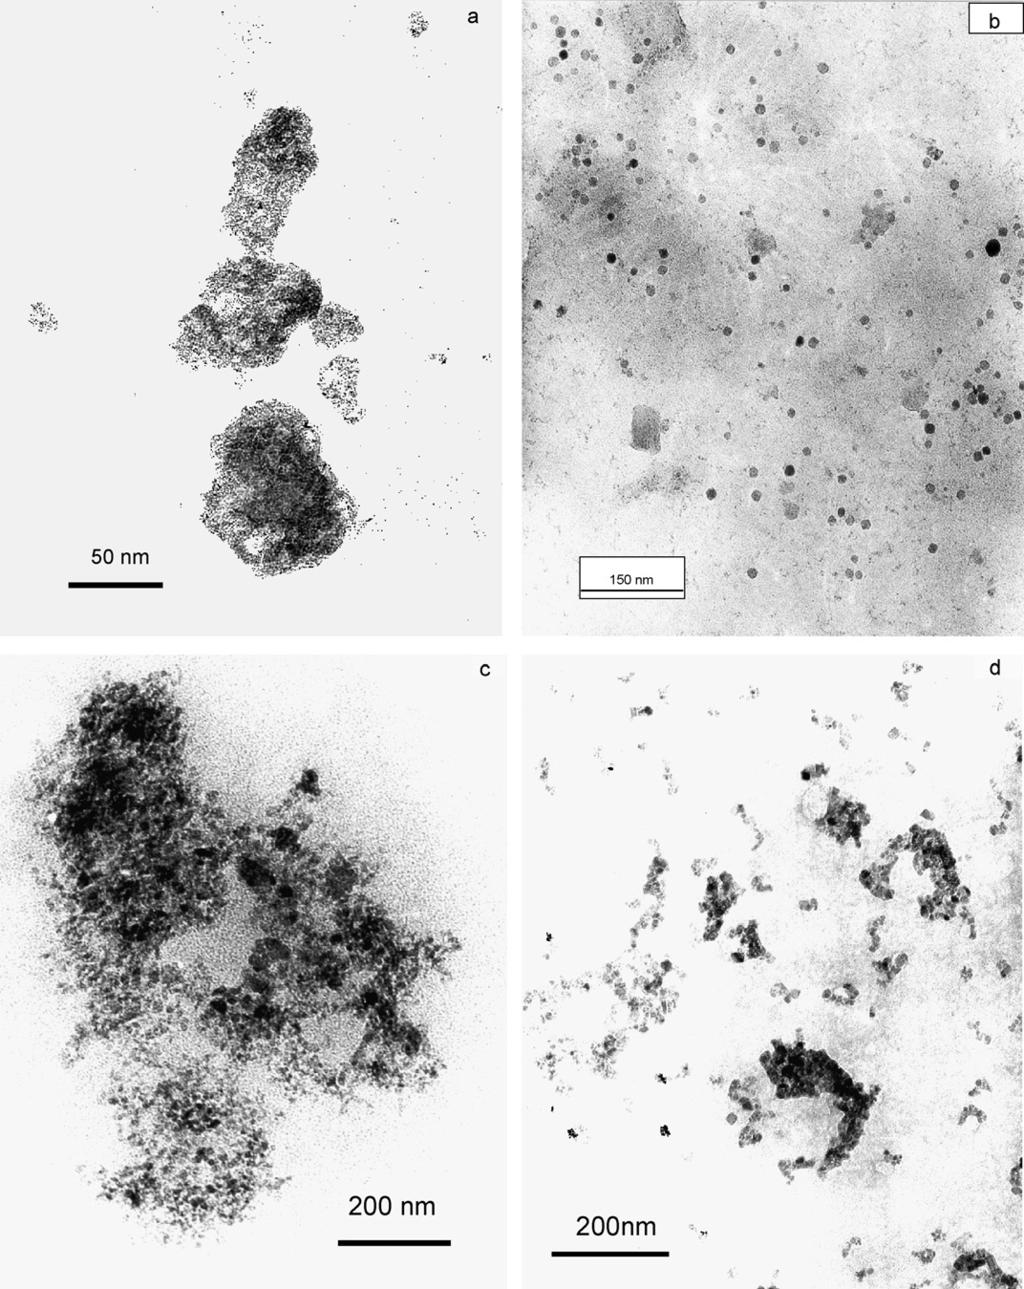 294 L. Jiang et al. / Materials Chemistry and Physics 101 (2007) 291 296 Fig. 4. TEM micrographs of as-prepared Fe 3 O 4 composite samples: (a) A4, (b) A8, (c) A2, and (d) A3 (see: Table 2).